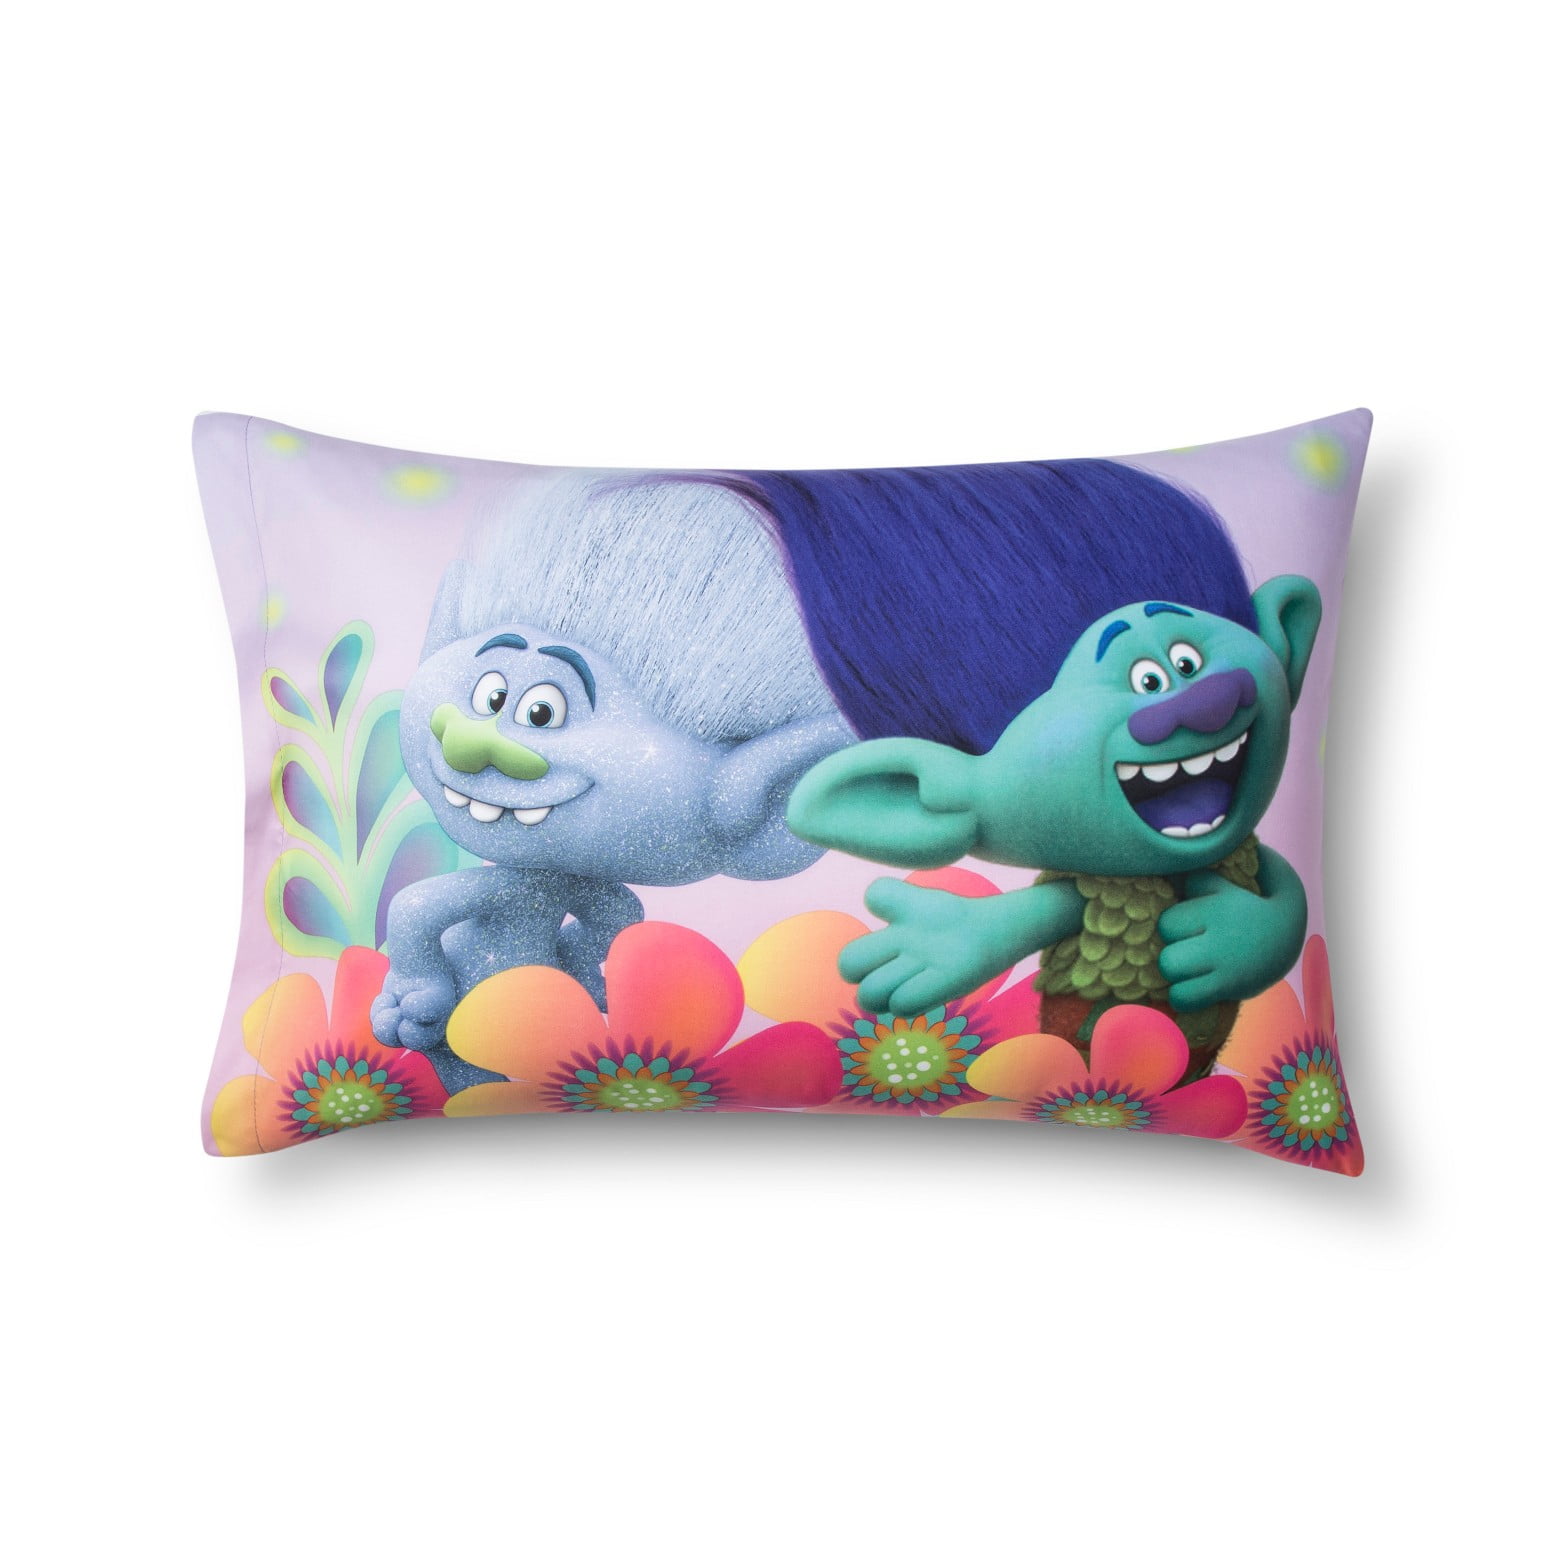 Details about   Novelty Pillow Case Cyber Punch 2000 Over The Internet Retro Ad Parody Troll 